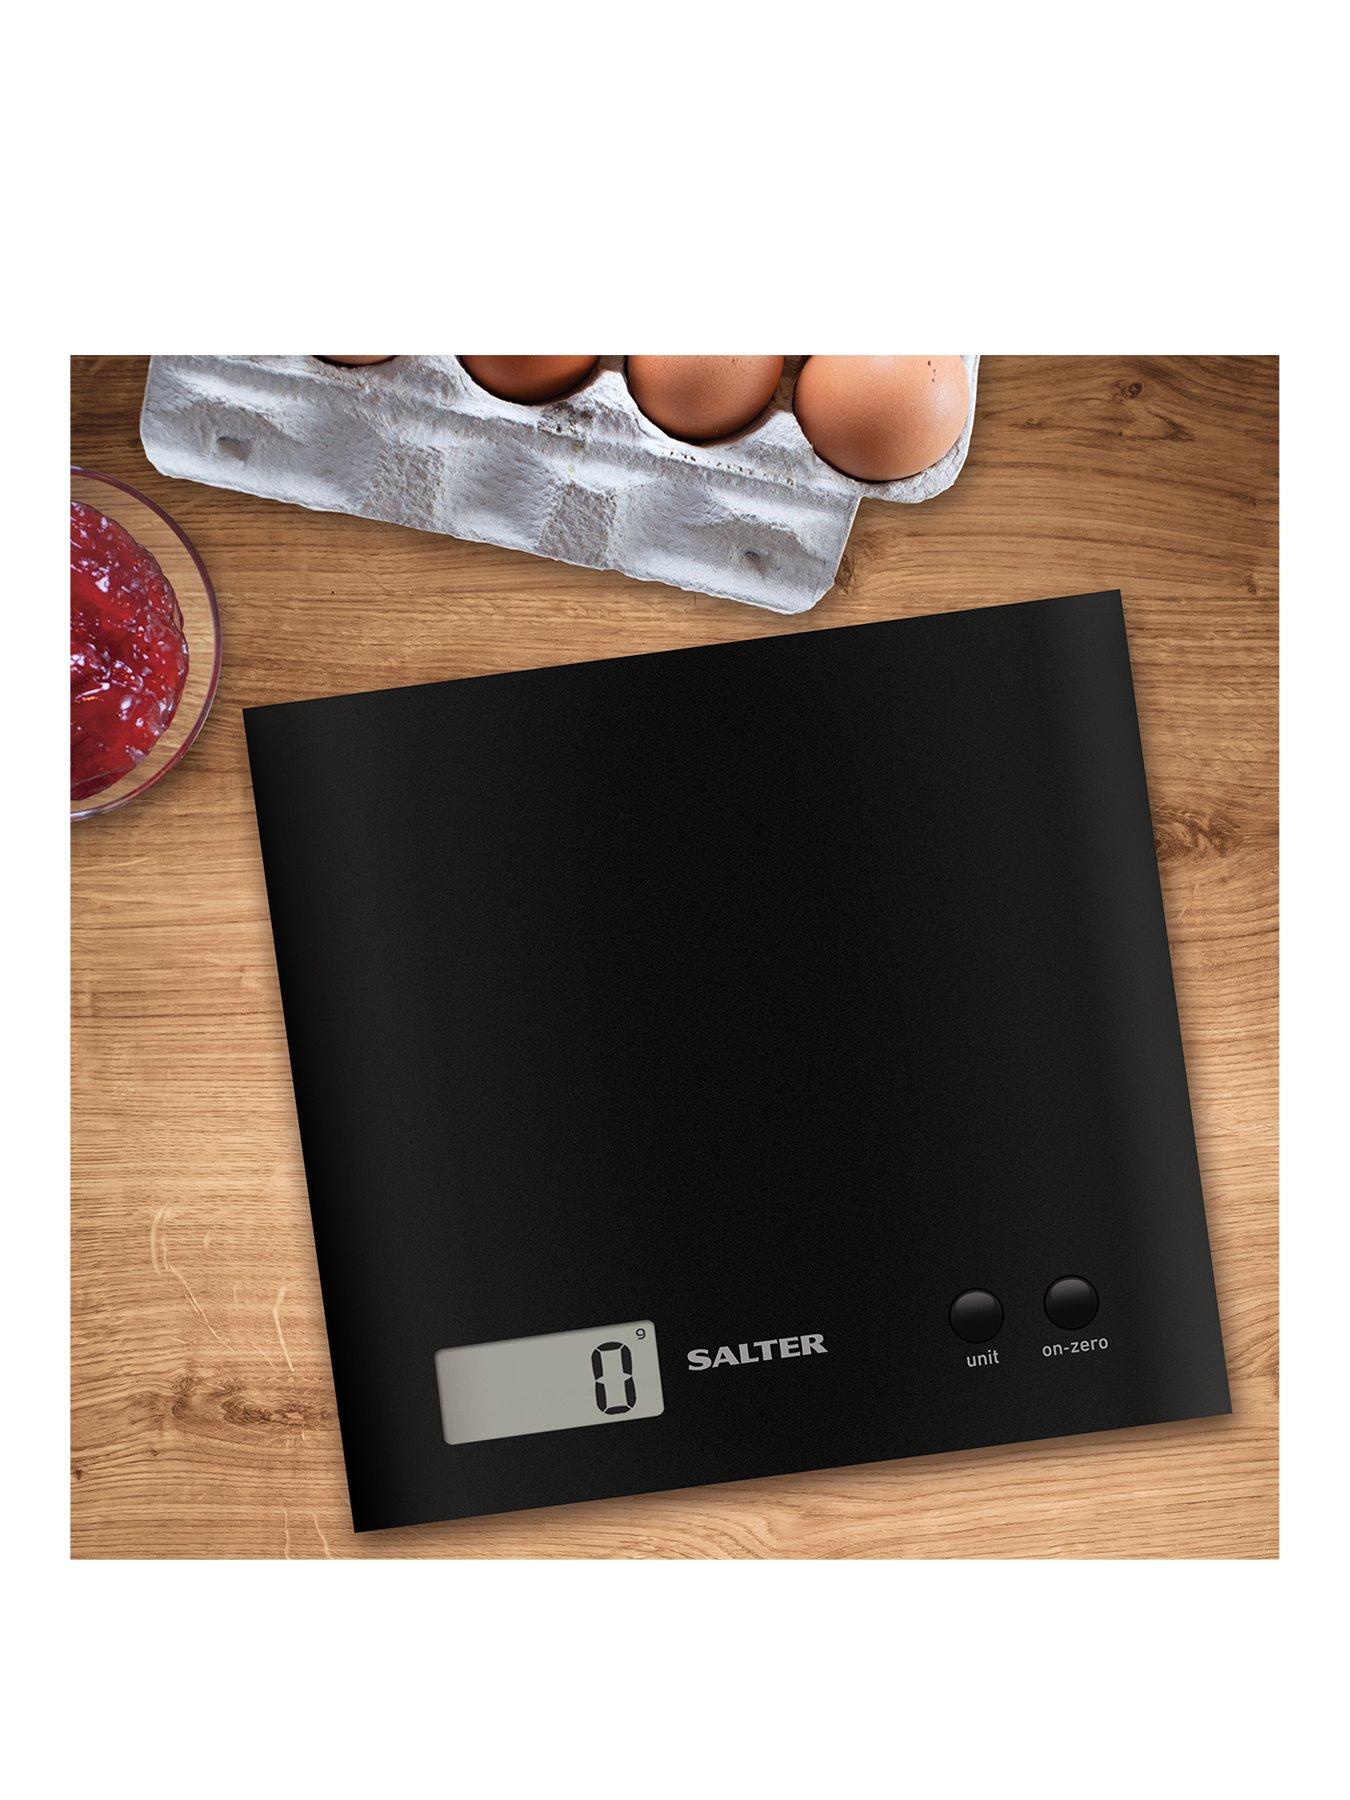 21 Best Food Scales with Calories (2023 Updated) – Far & Away UK